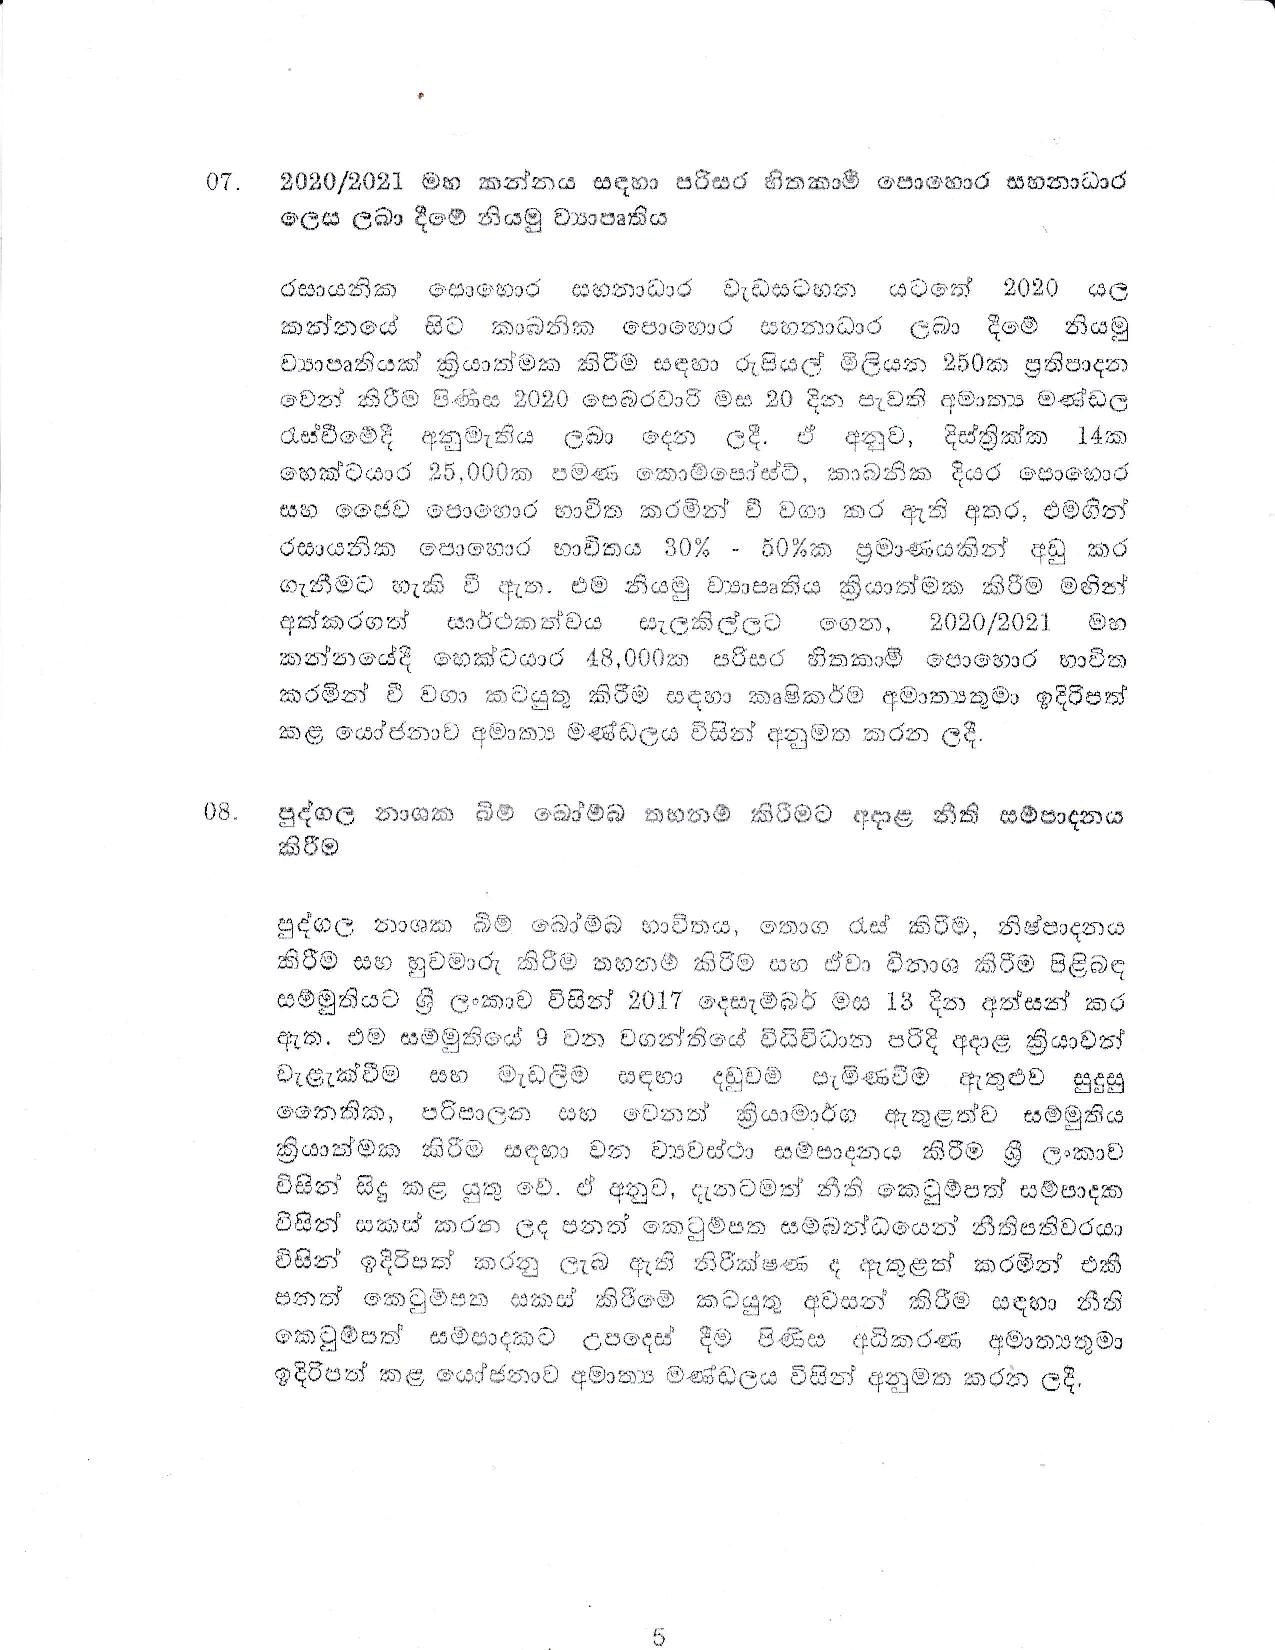 Cabinet Decision on 28.09.2020 page 005